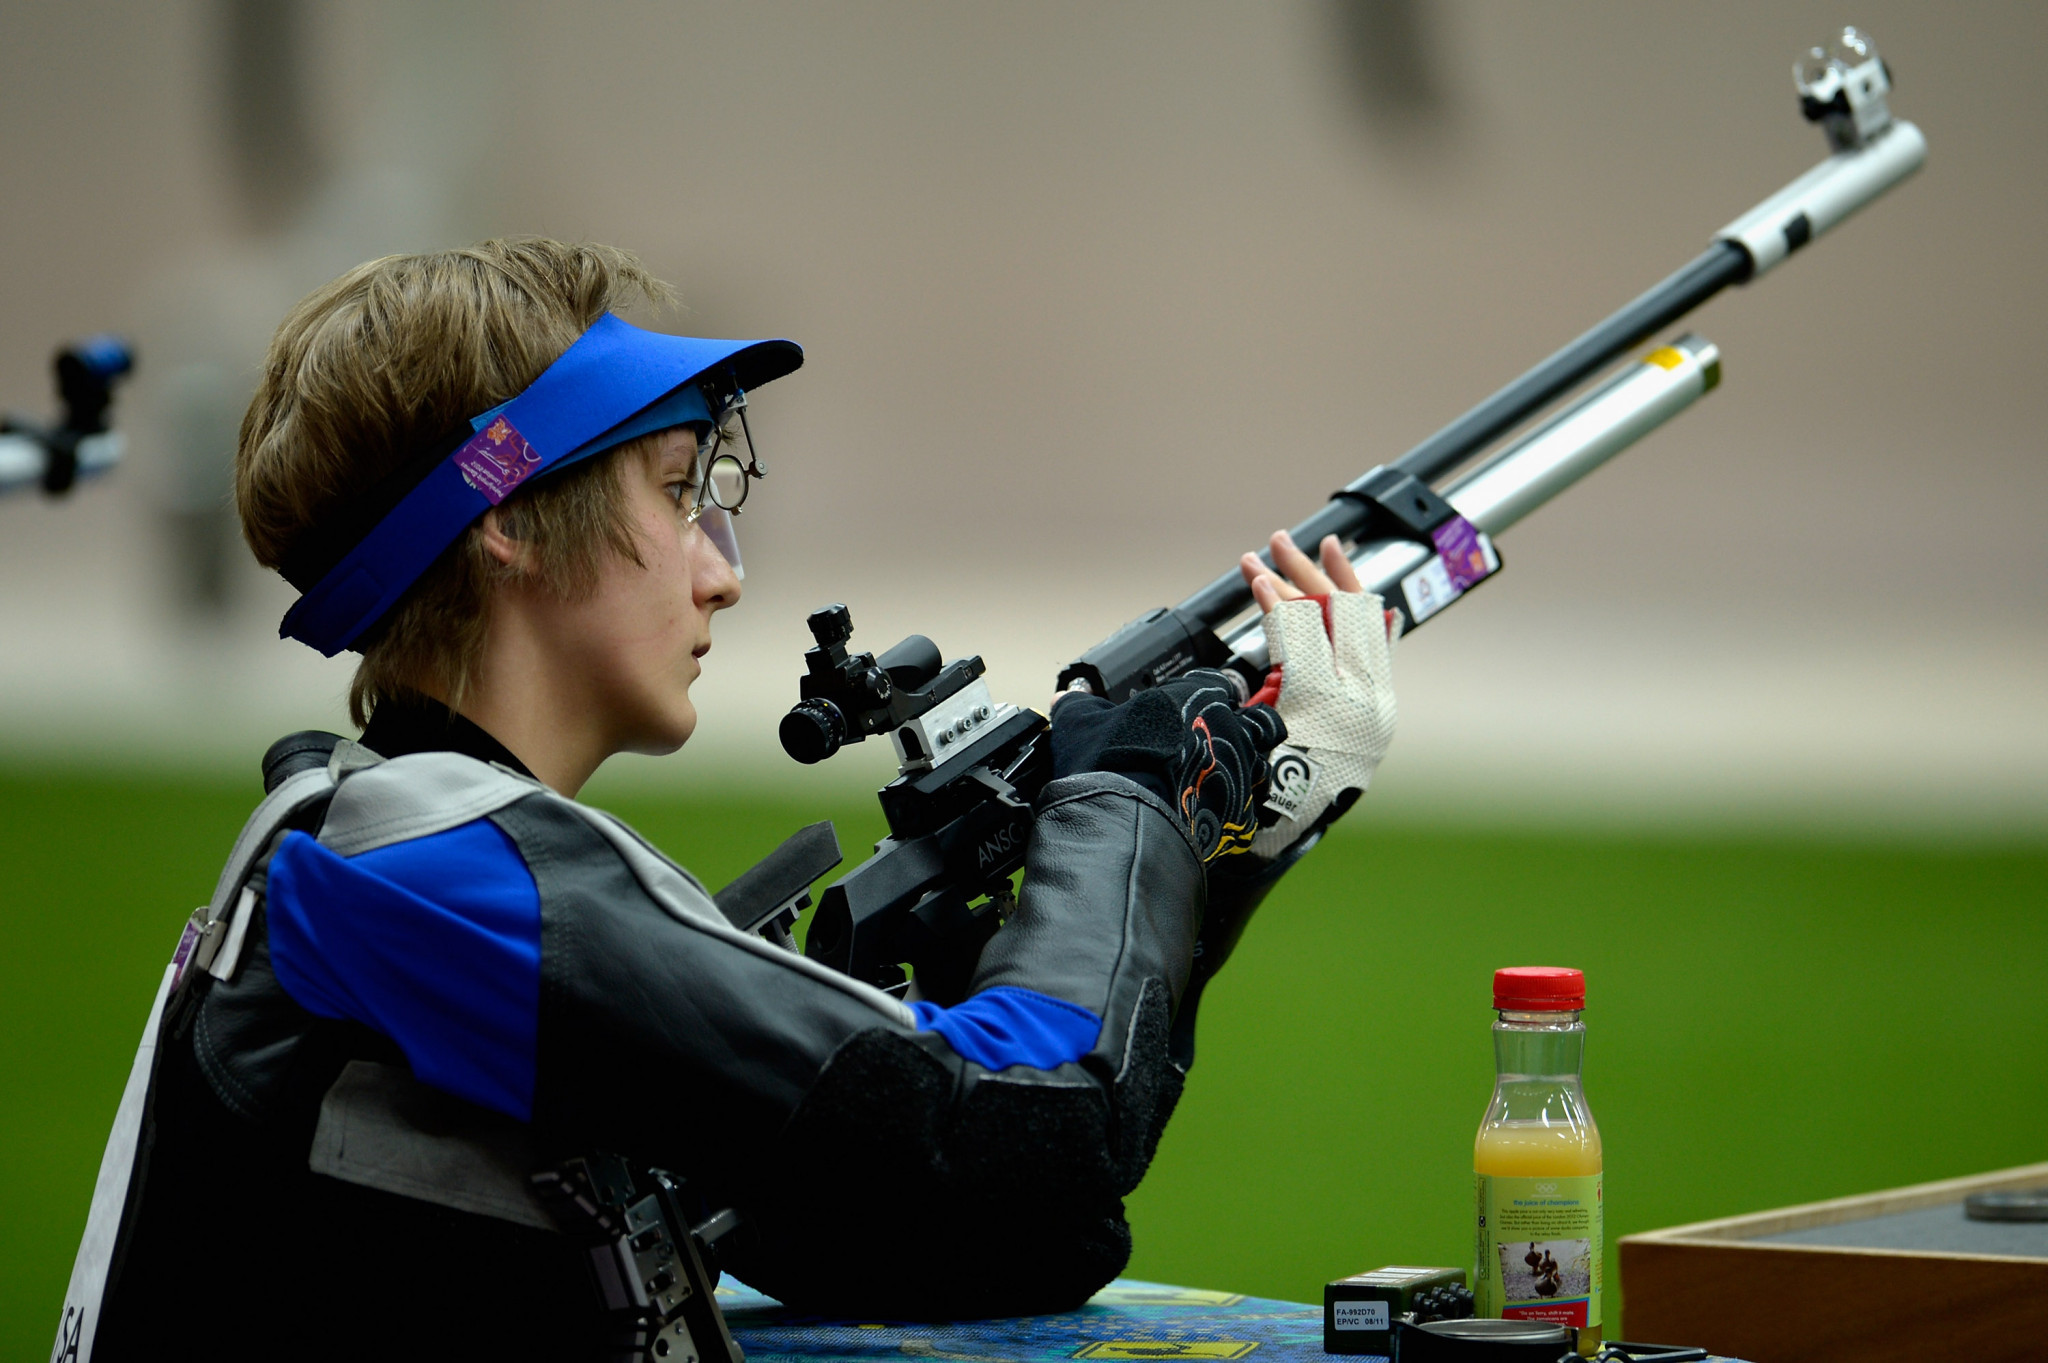 Rio 2016 Paralympic Games silver medallist Natascha Hiltrop will head the German team at the International Shooting Competition ©Getty Images